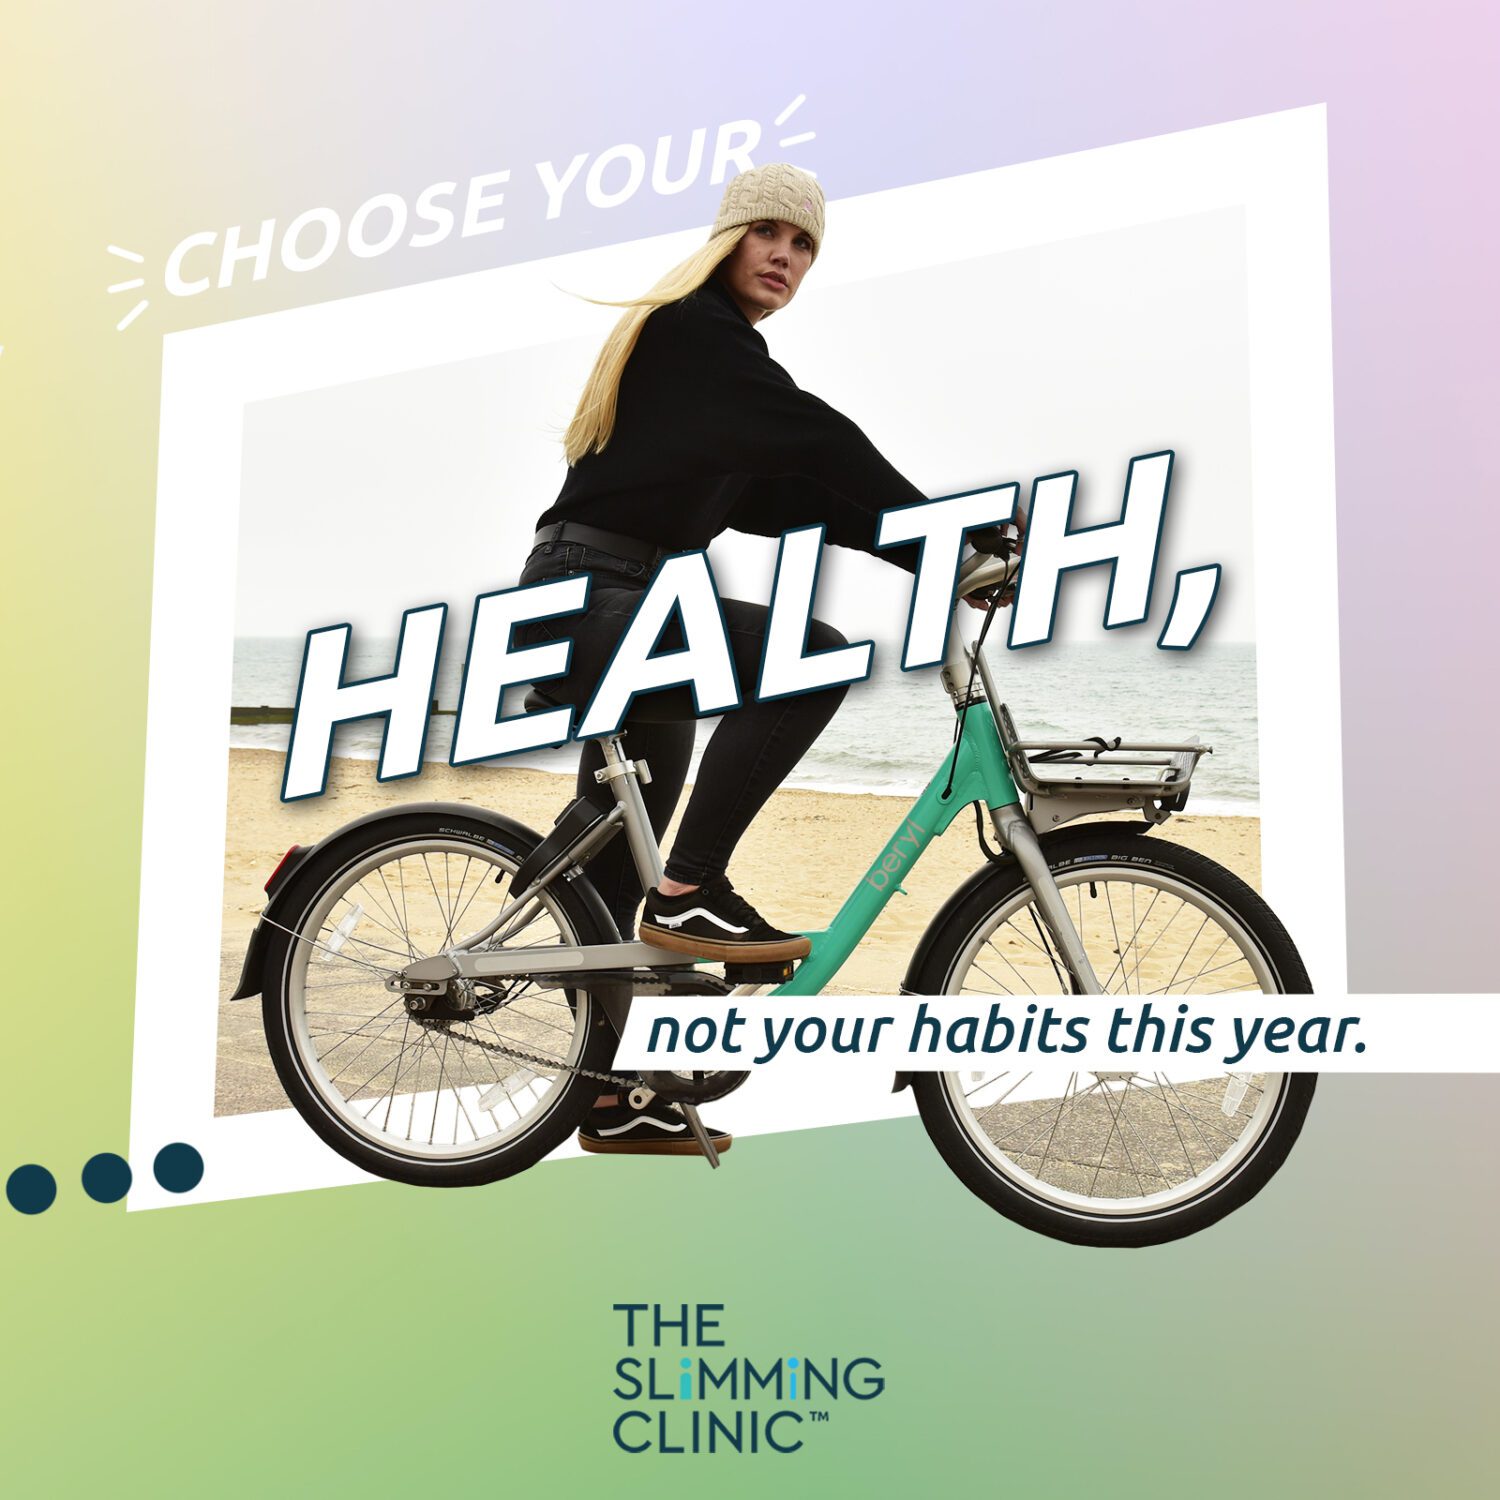 Your New Year’s Resolution: Health Not Habits